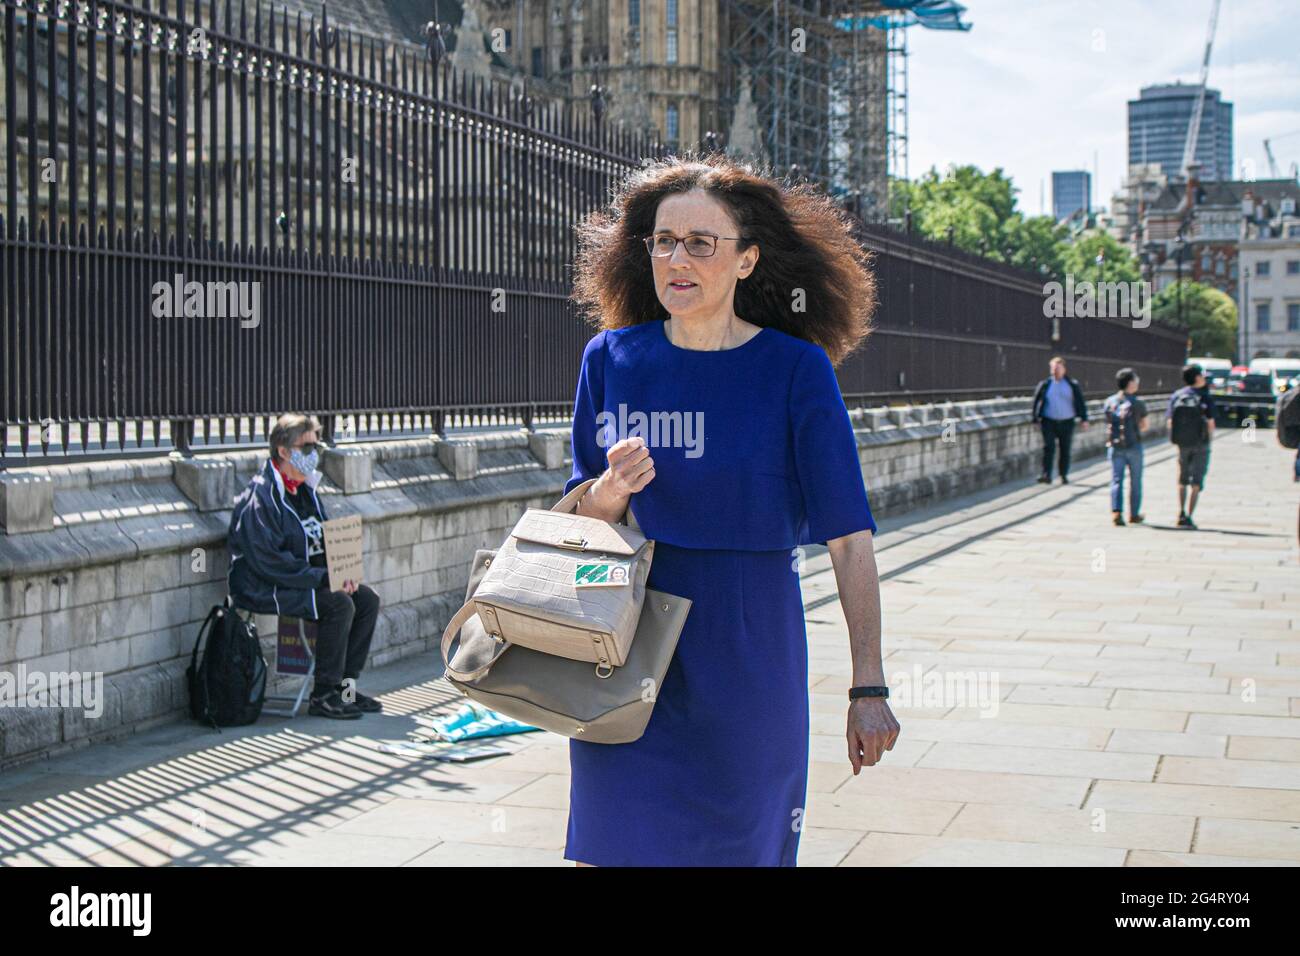 WESTMINSTER LONDON 23 June 2021. Theresa Villiers, Conservative MP for Chipping Barnet who served as Secretary of State for Environment, Food and Rural Affairs from 2019 to 2020 arrives at Parliament. Credit amer ghazzal/Alamy Live News Stock Photo